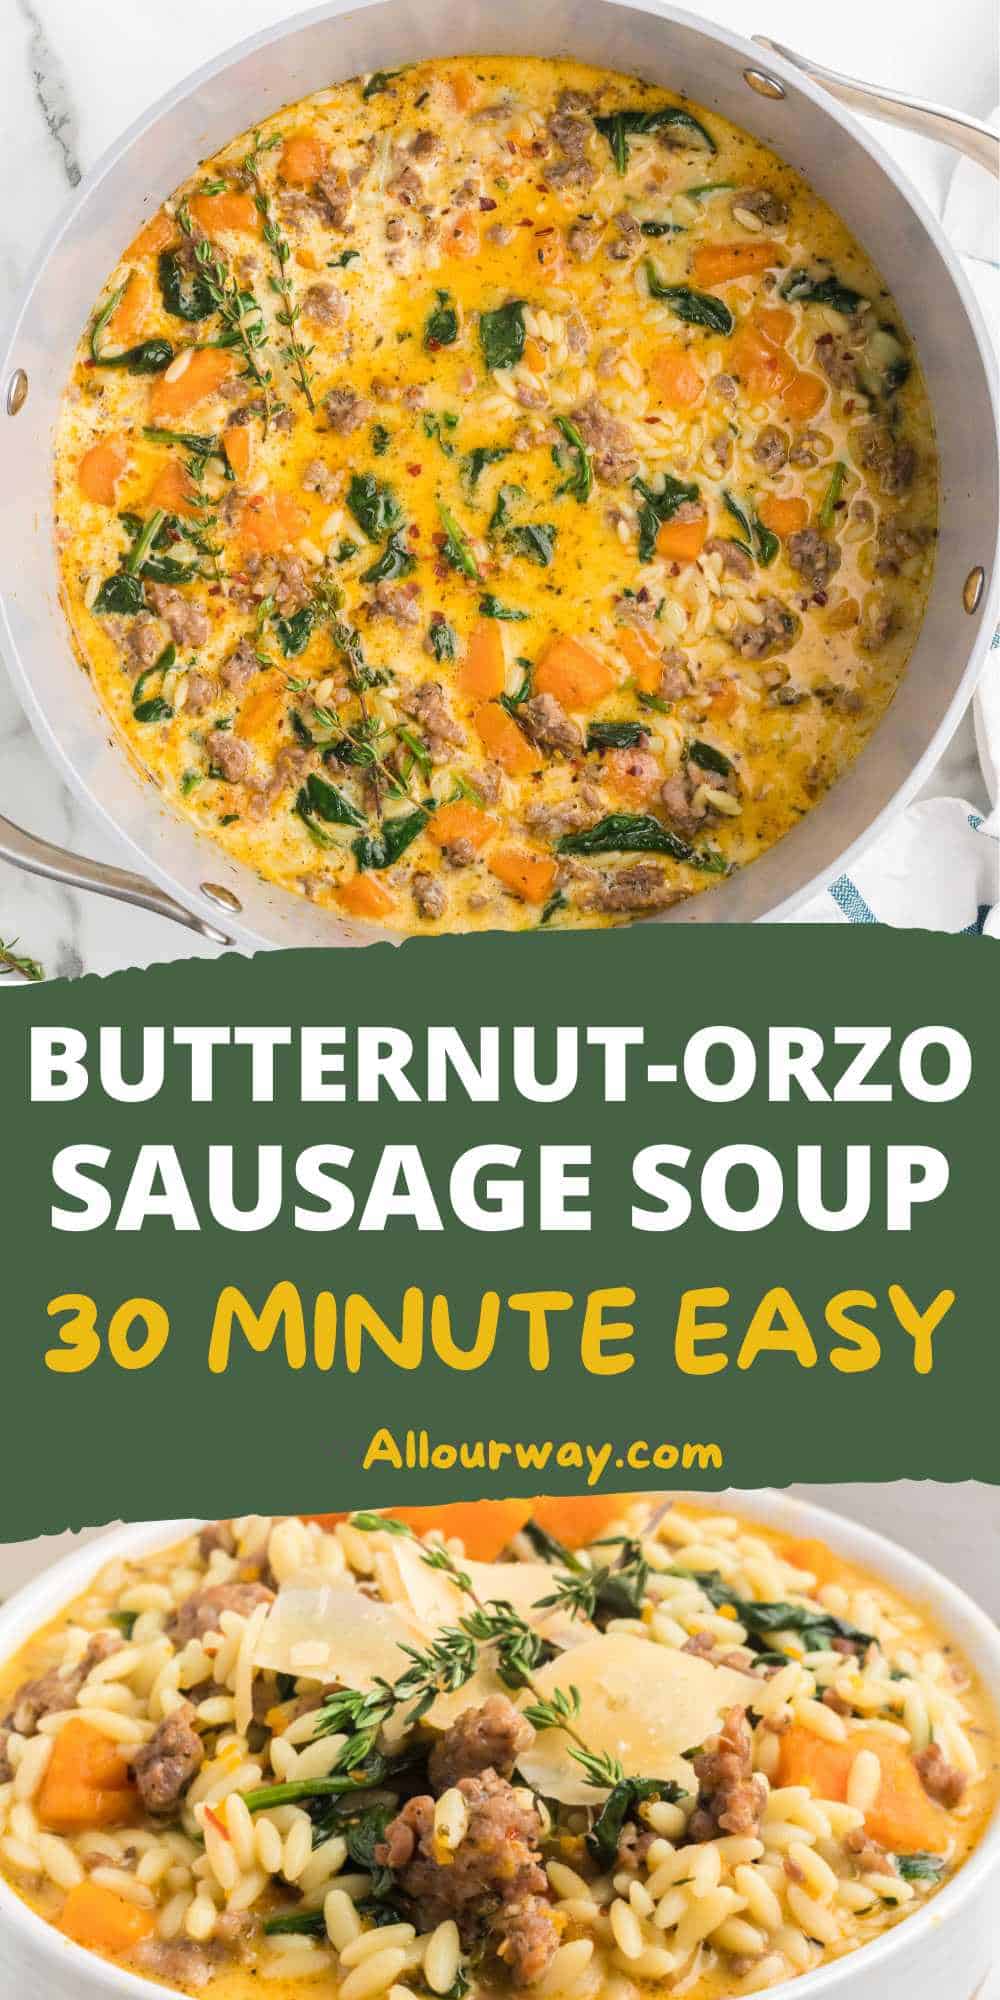 Pinterest collage with title overlay for Butternut Orzo Sausage Soup recipe.